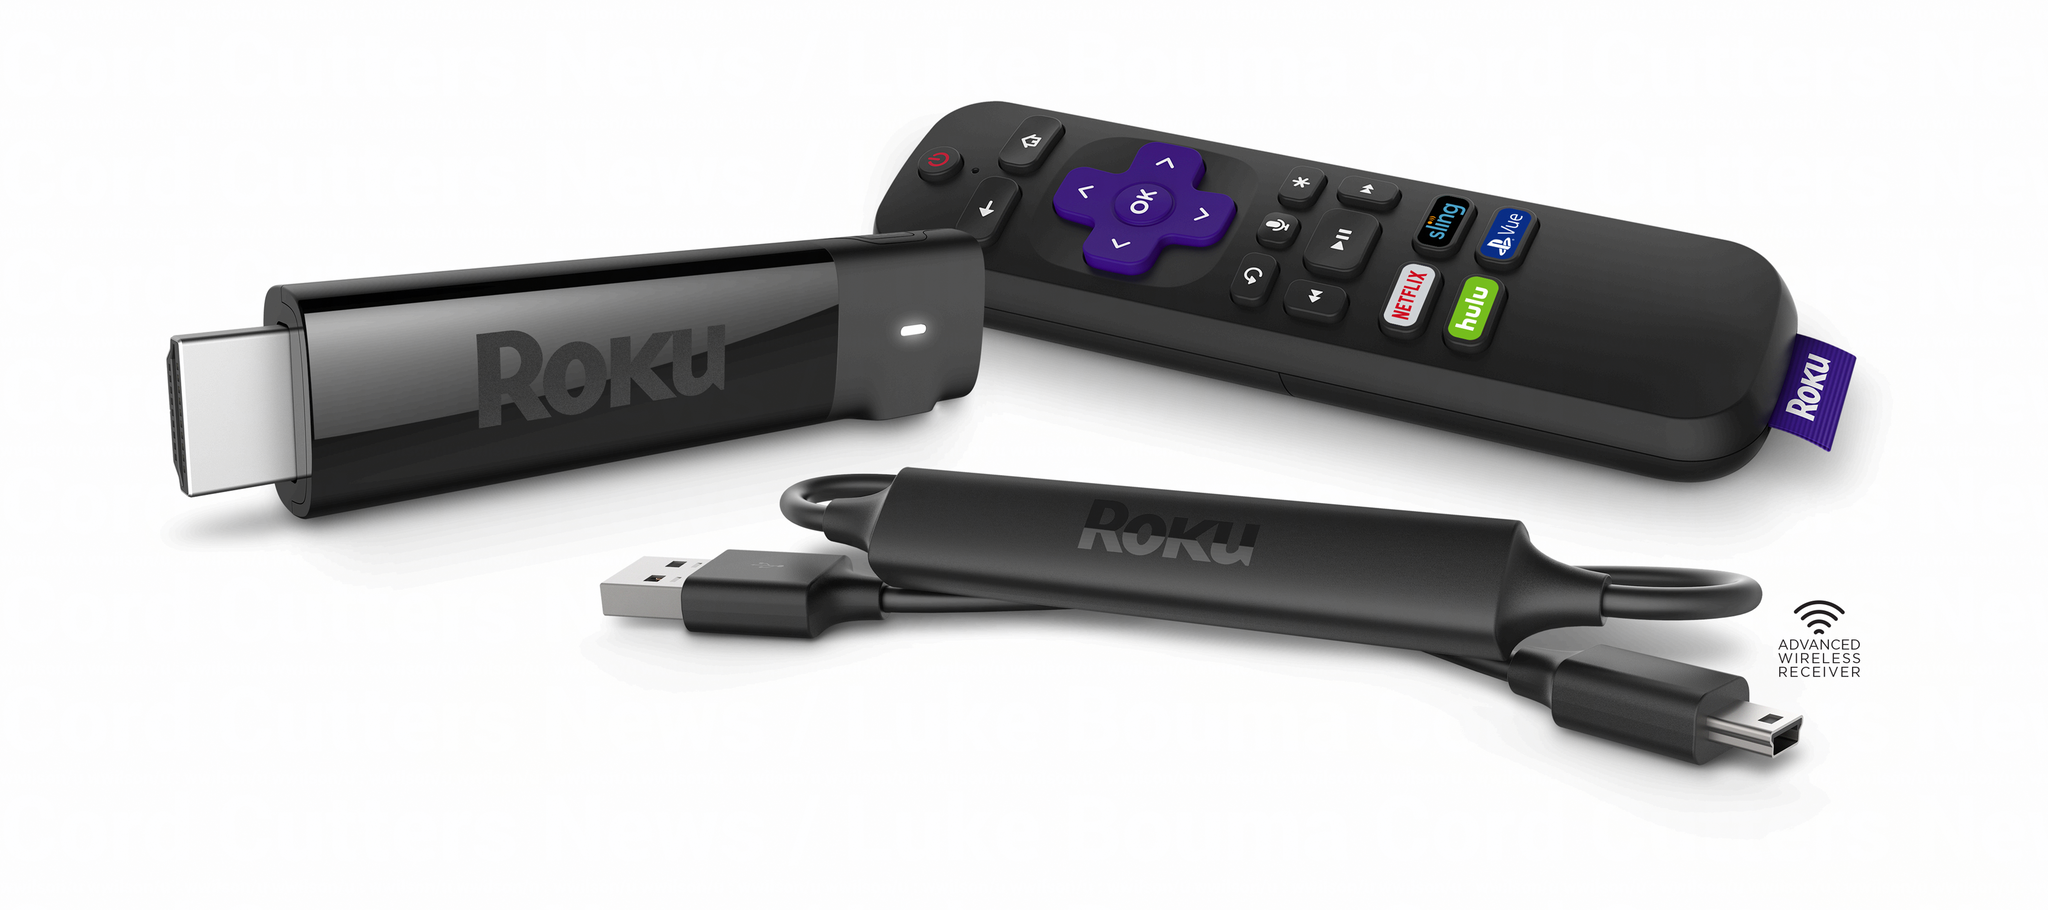 Roku OS 8: Single Sign-On, Grid Guide, Fast Start, New Voice Controls, & More